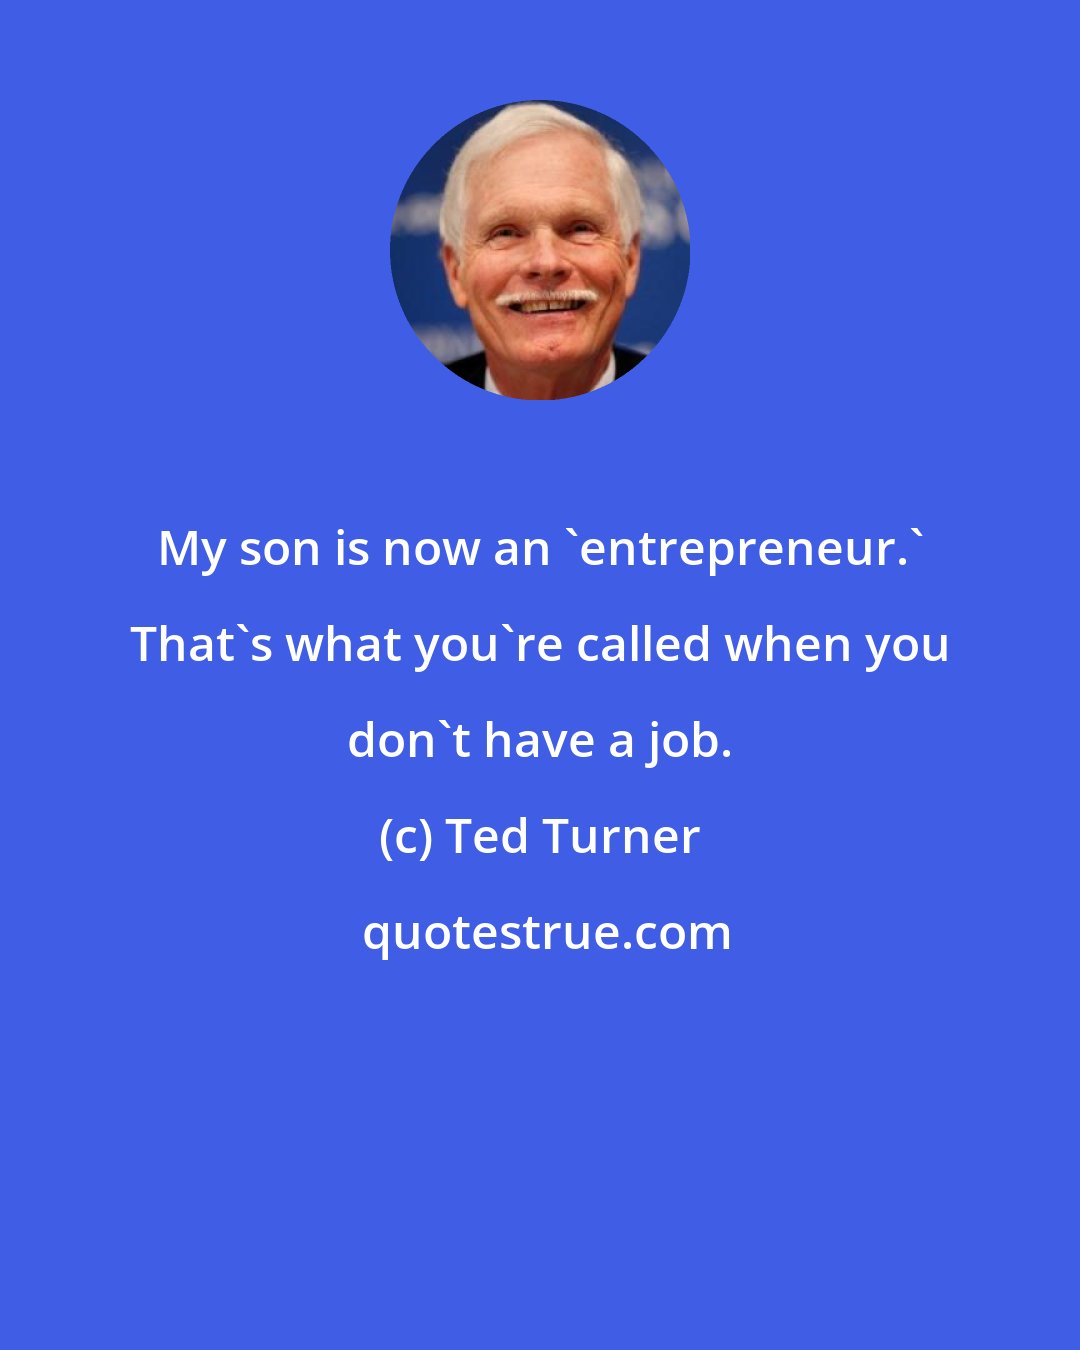 Ted Turner: My son is now an 'entrepreneur.' That's what you're called when you don't have a job.